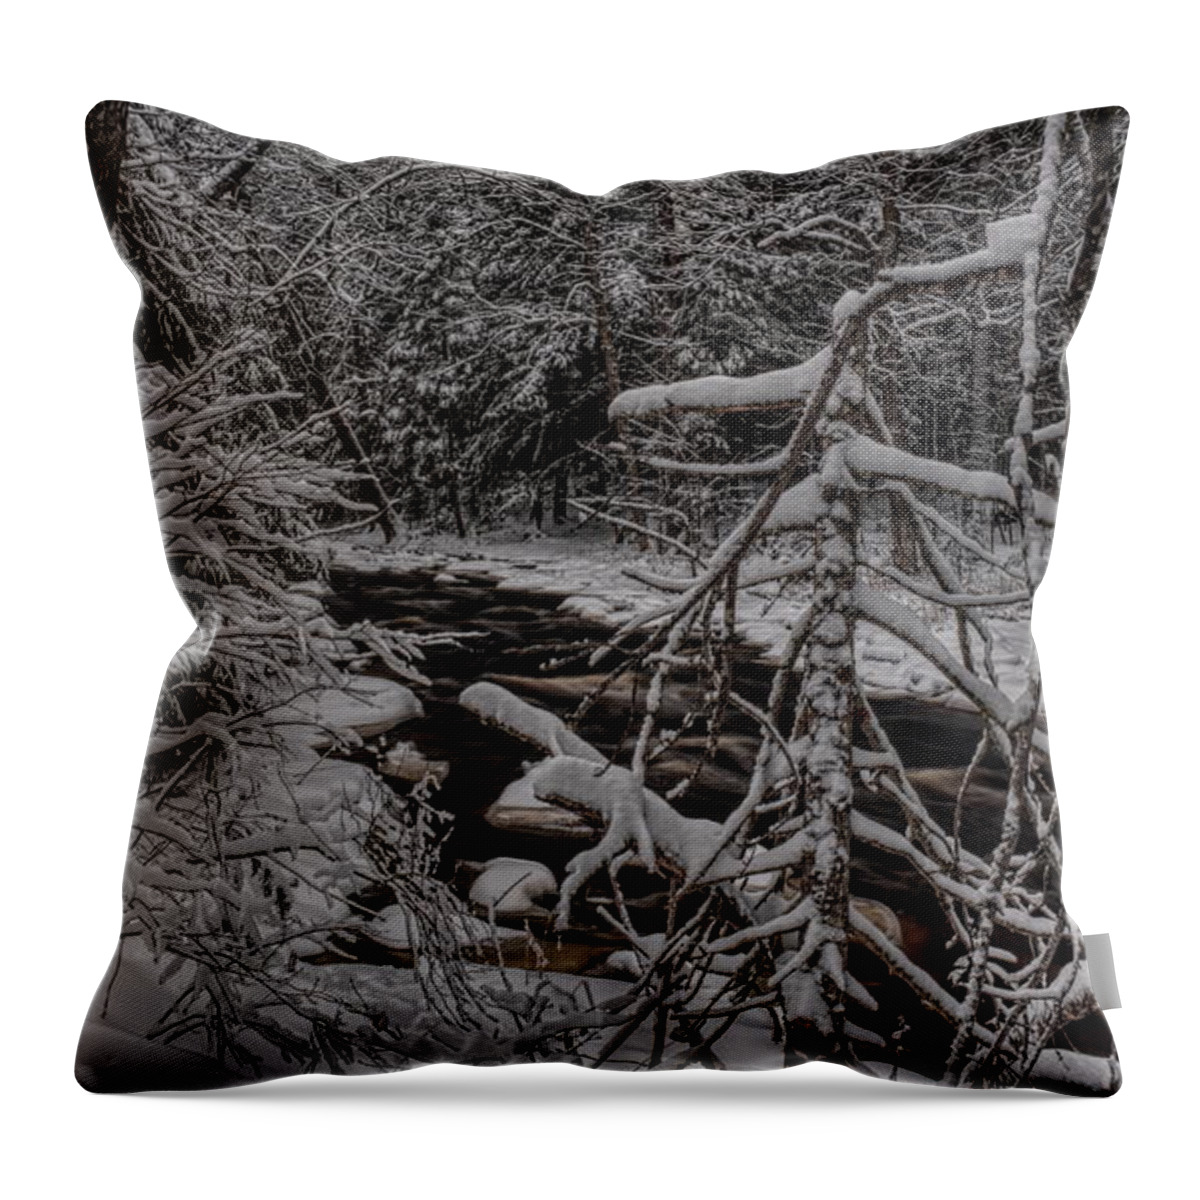 Prairie River Throw Pillow featuring the photograph Snow Covered Prairie River by Dale Kauzlaric